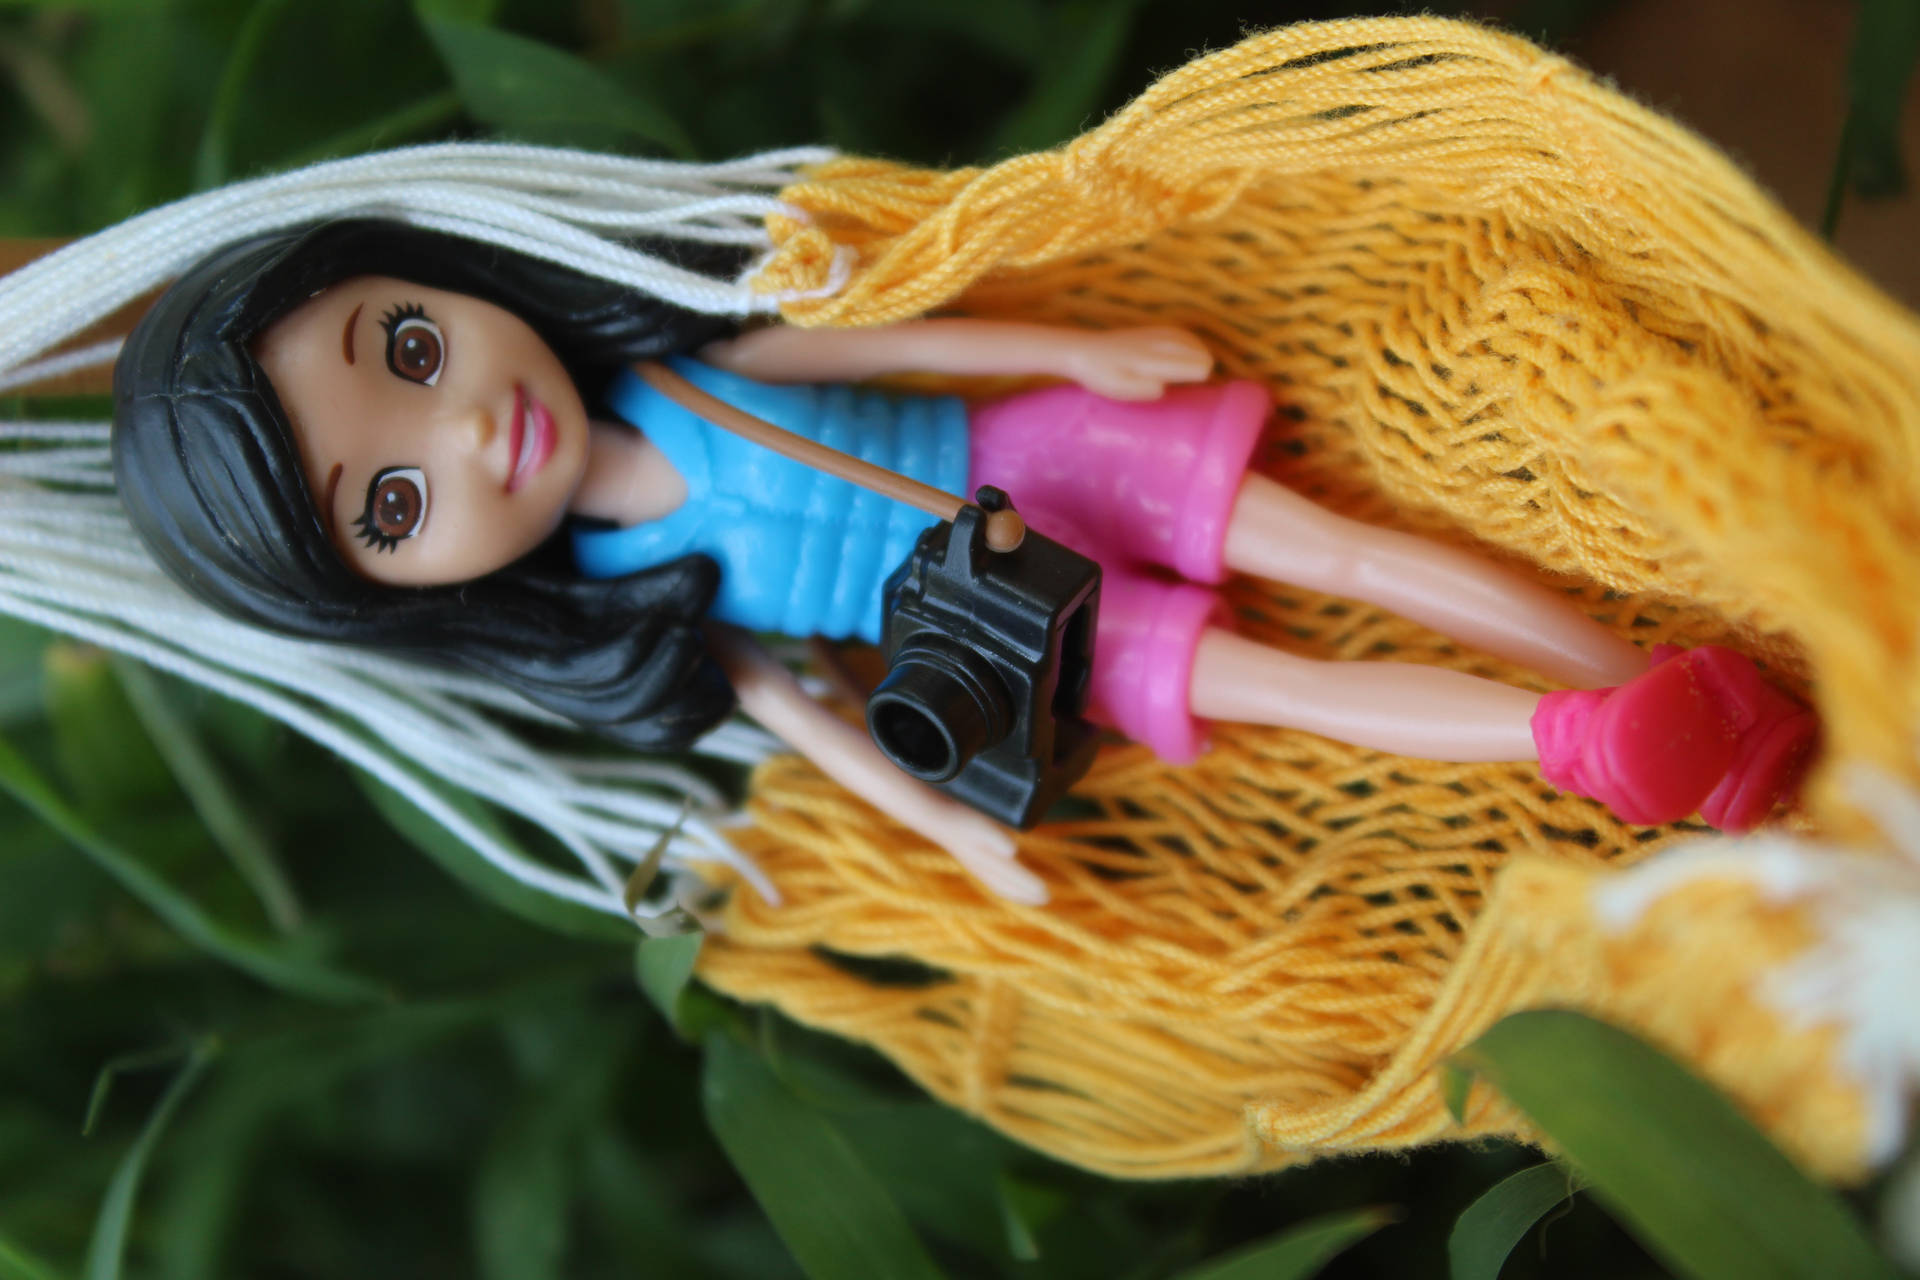 Barbie 5184X3456 Wallpaper and Background Image